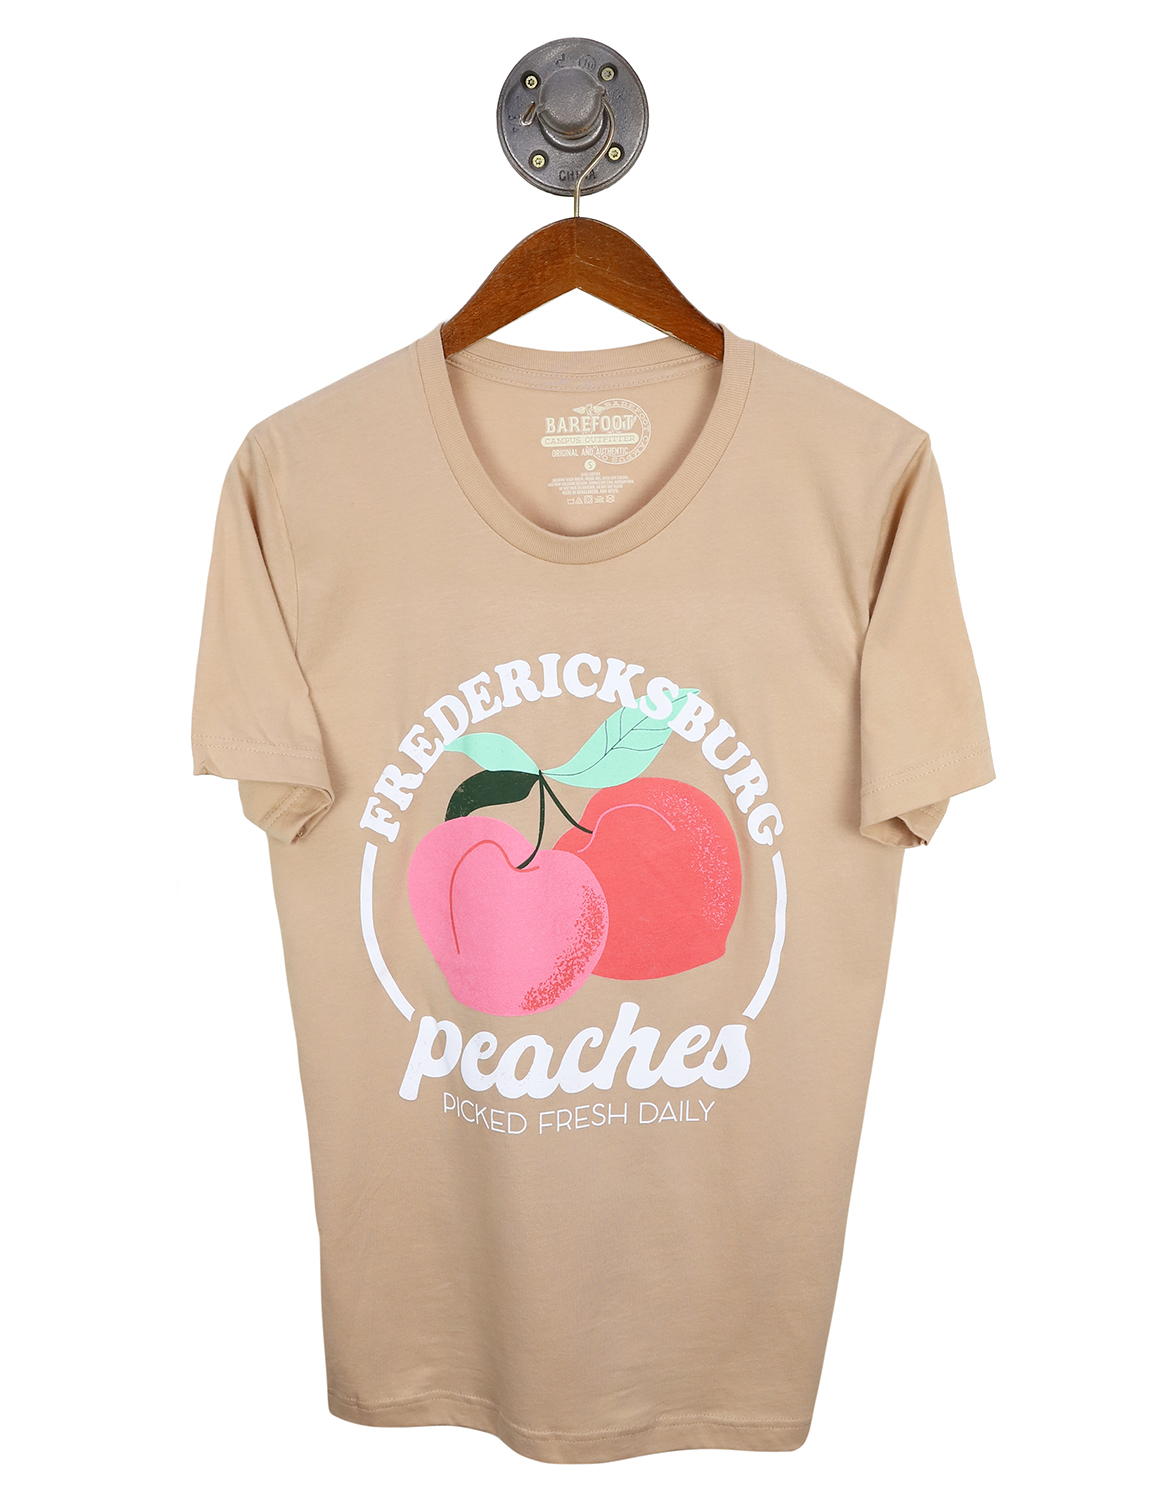 brianna pierre recommends The Naked Peaches